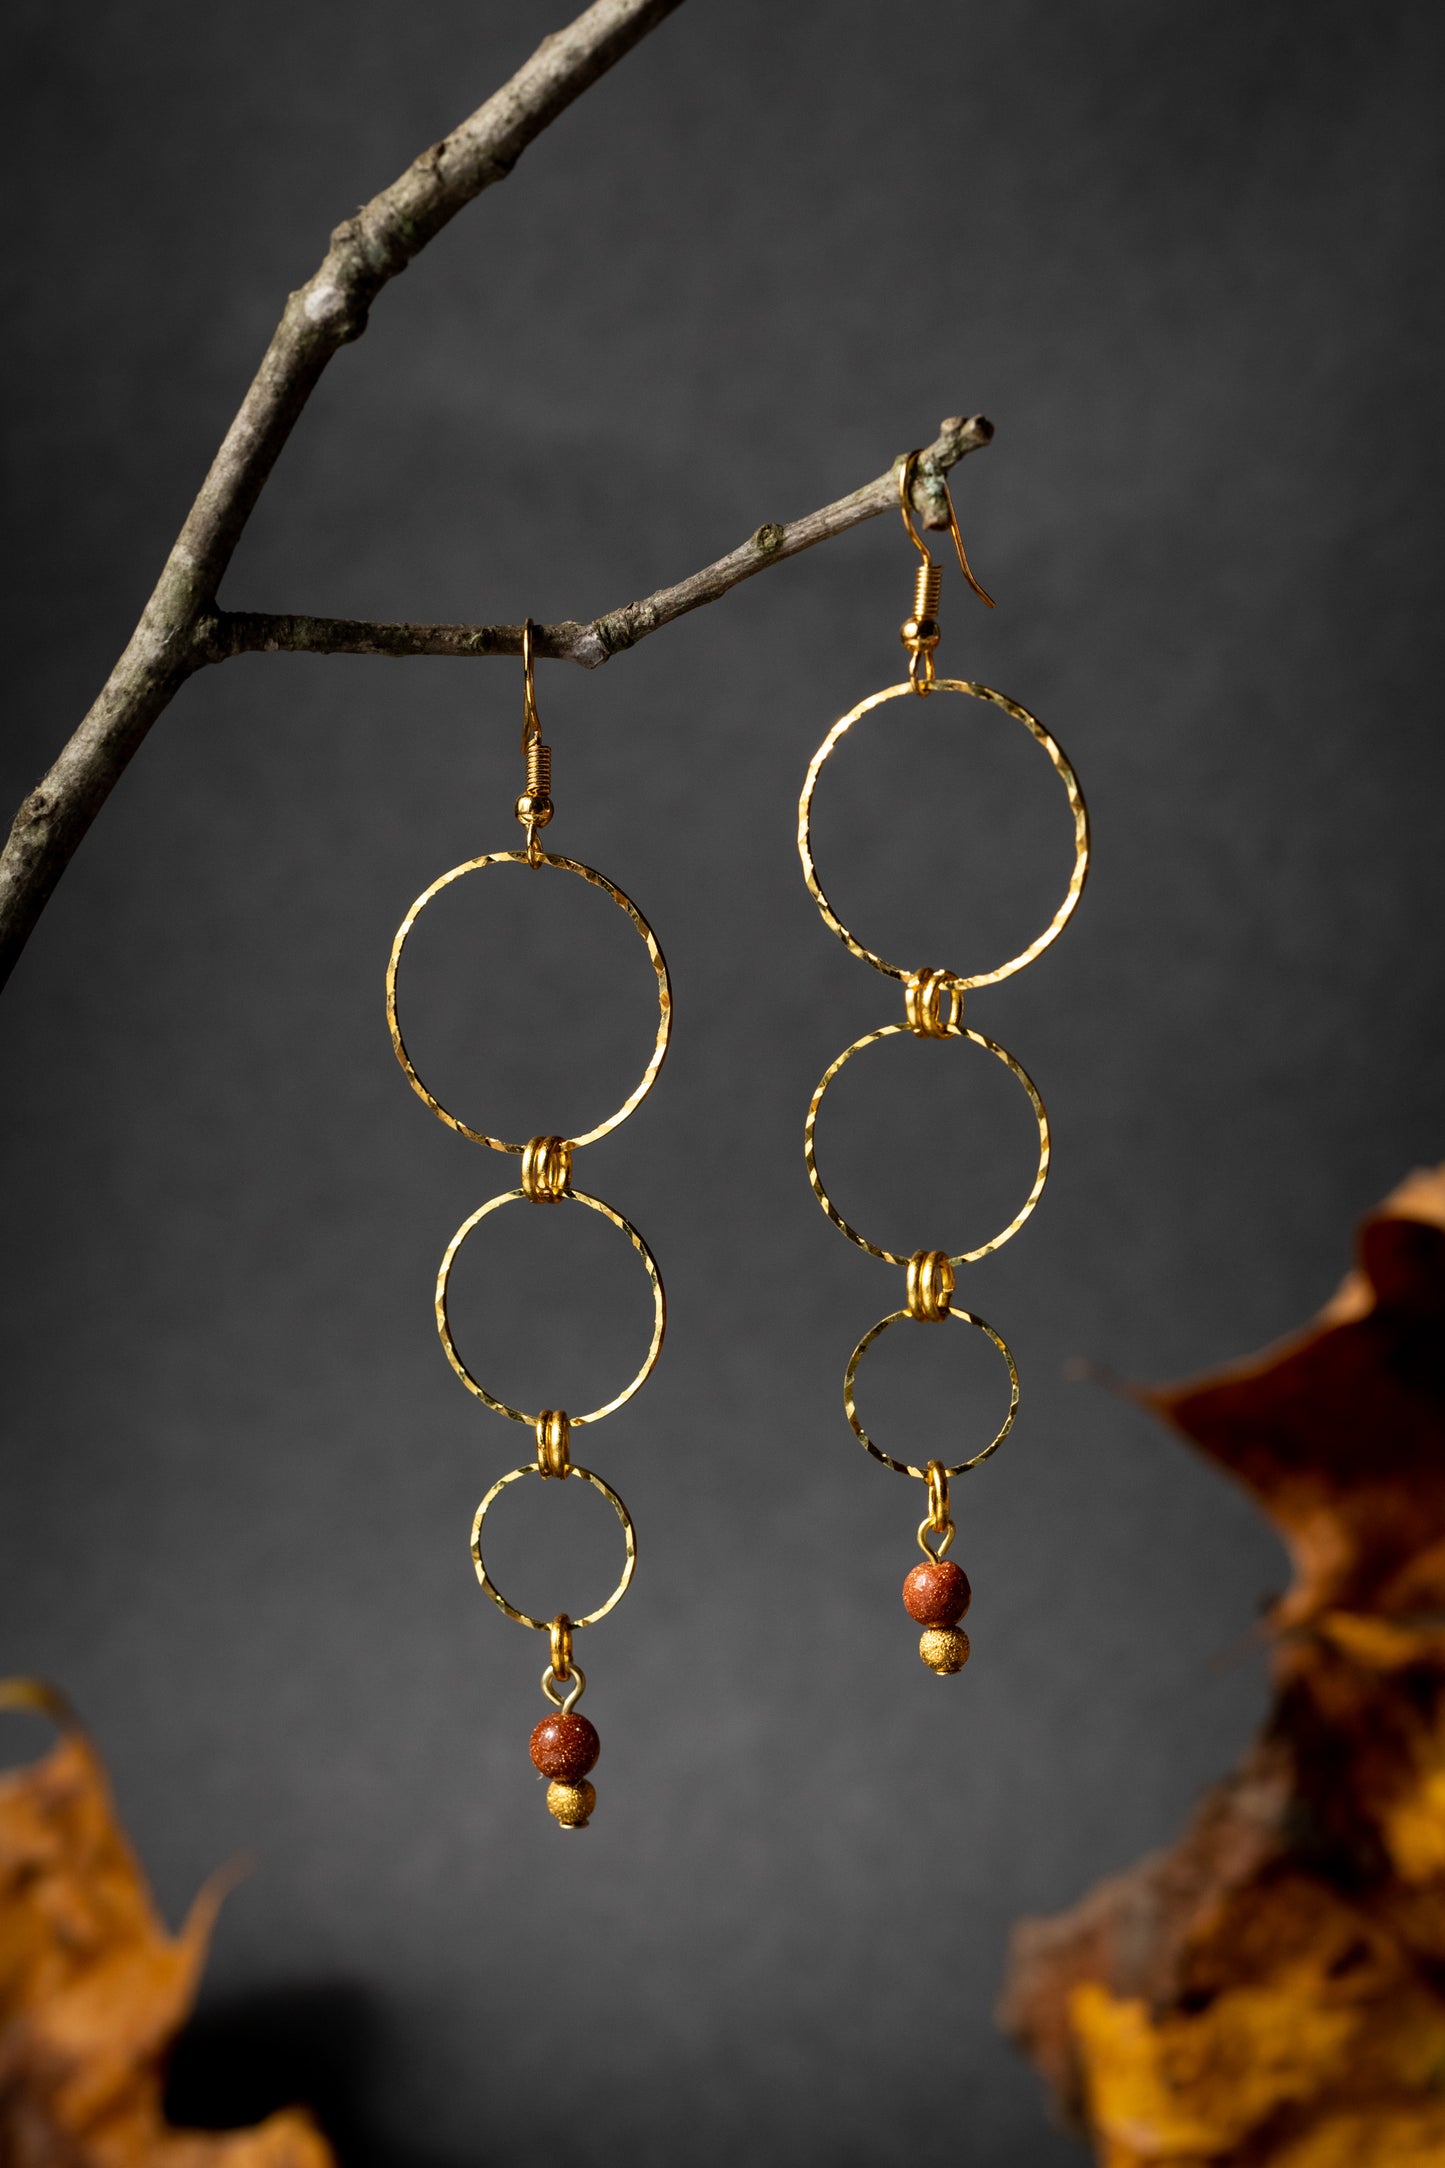 Notched Golden Rings Long Dangles